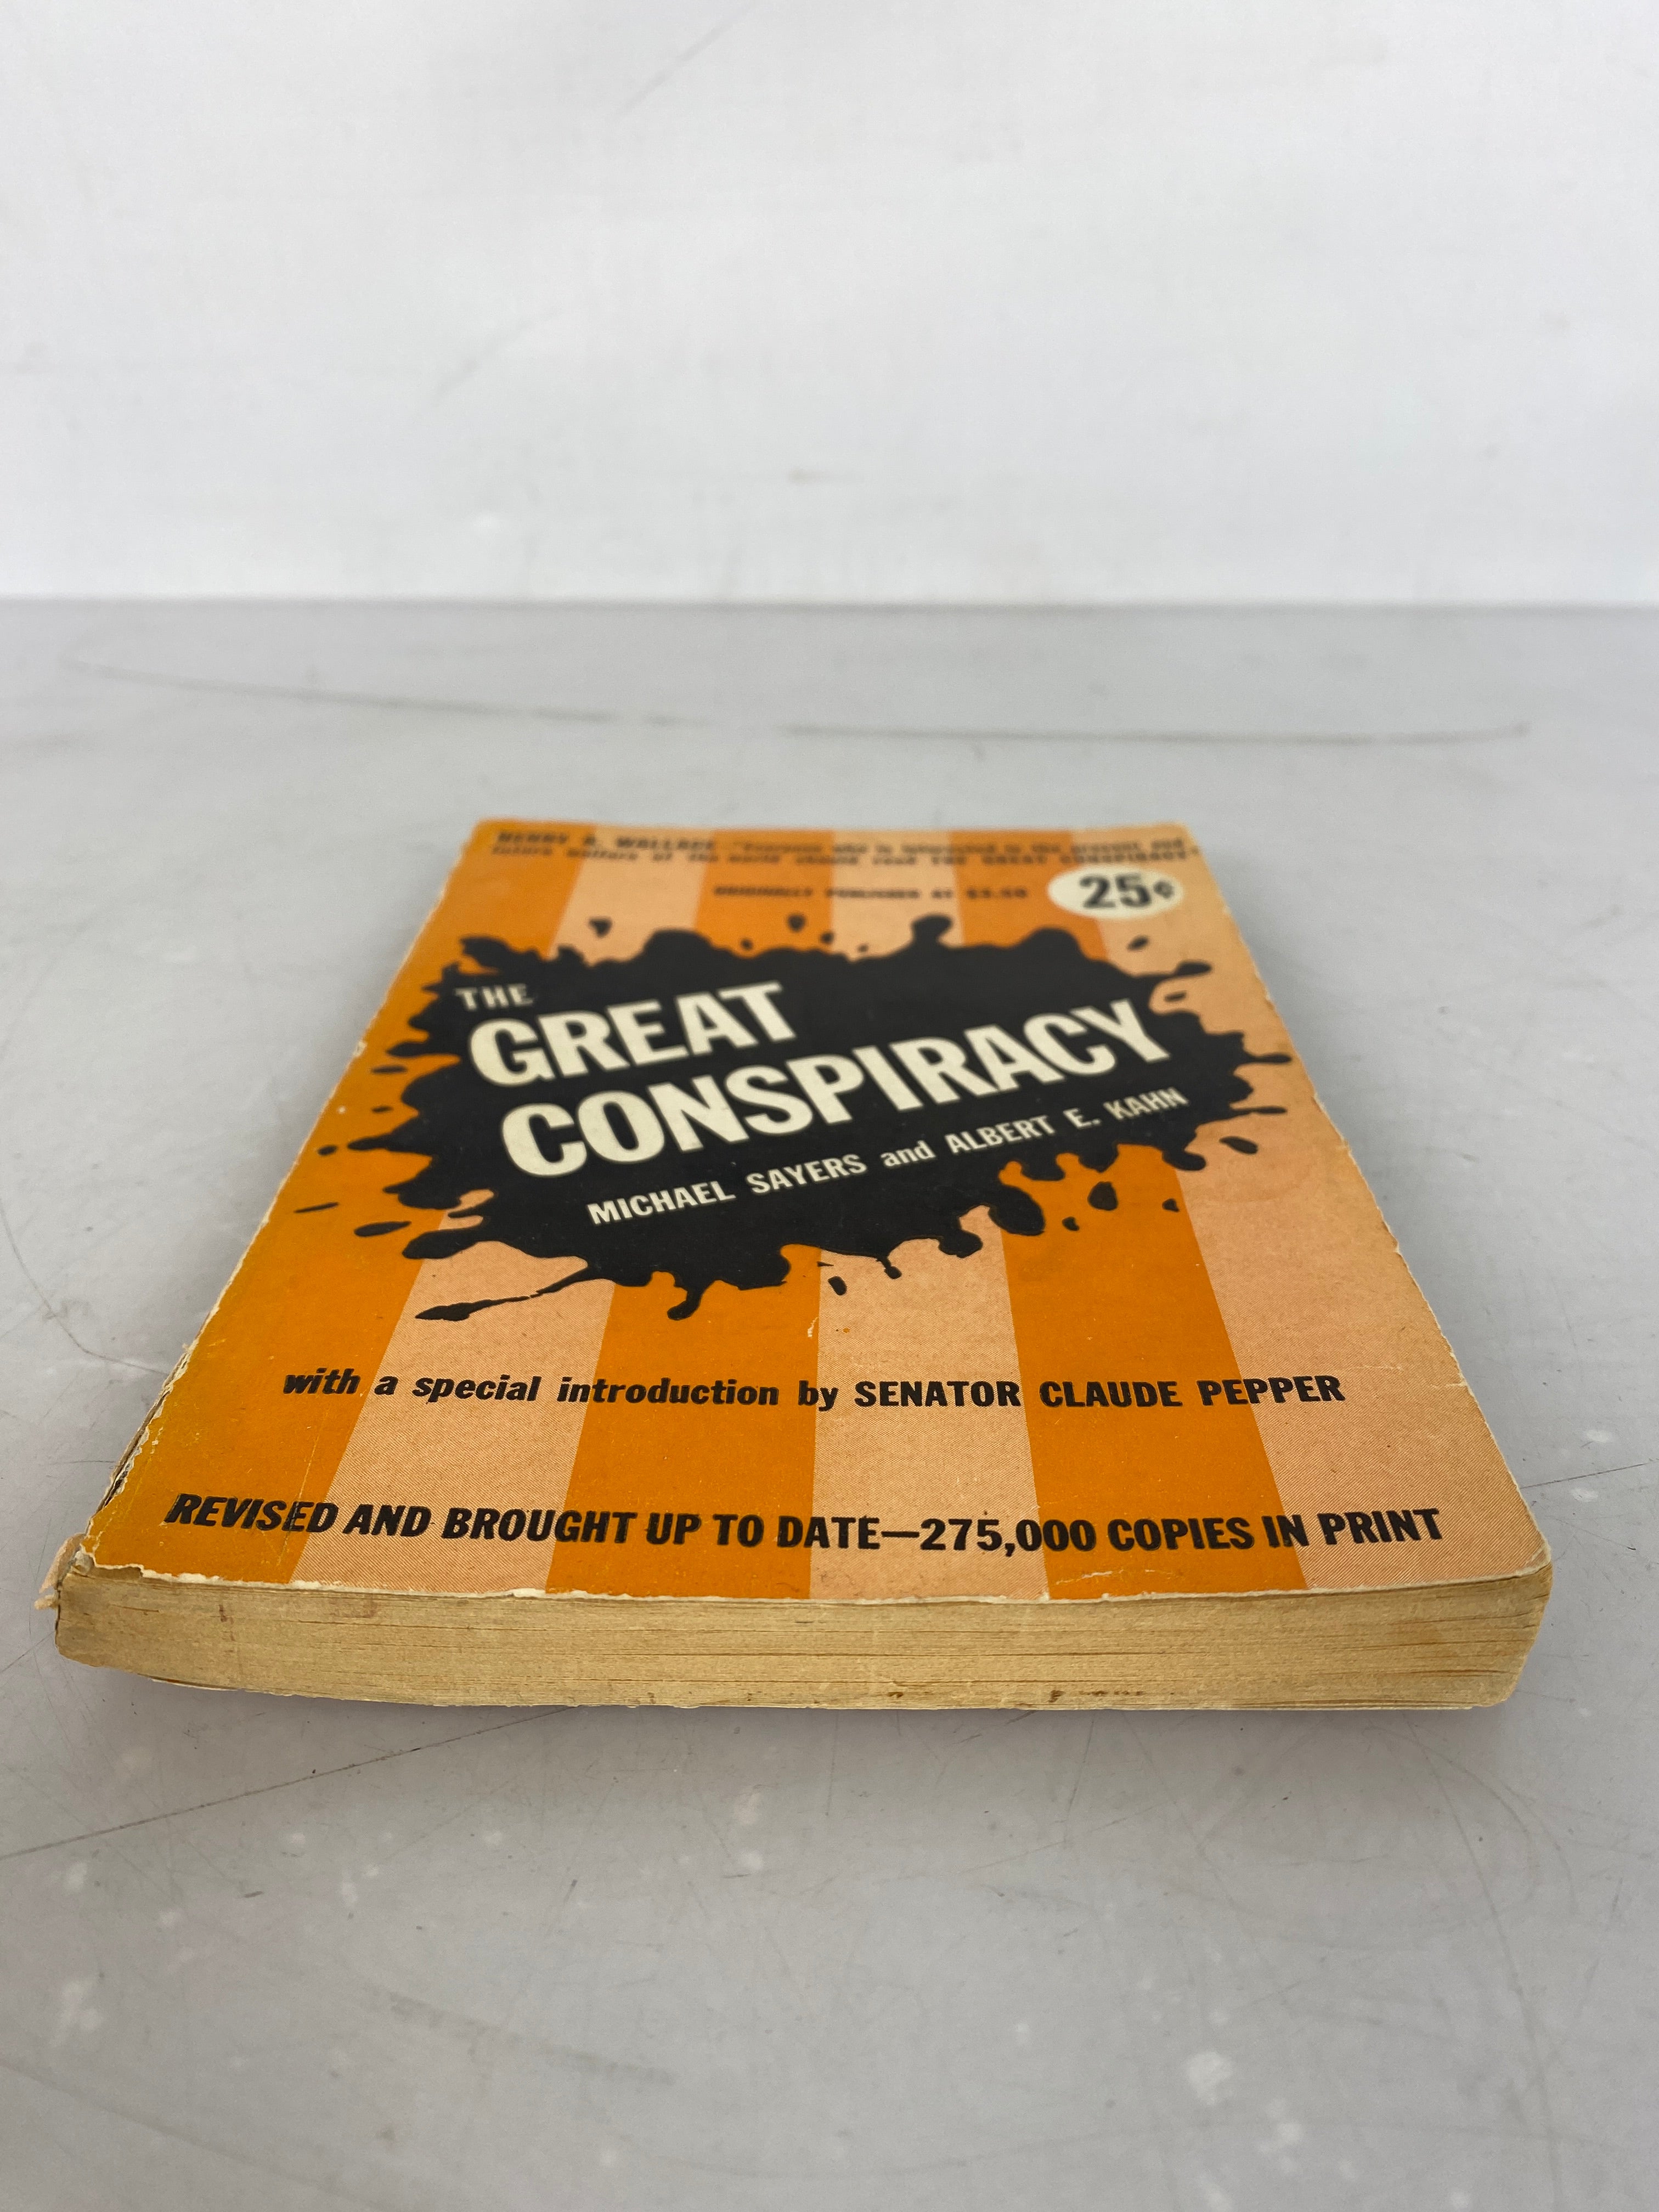 The Great Conspiracy by Michael Sayers and Albert Kahn Fourth Printing 1947 SC